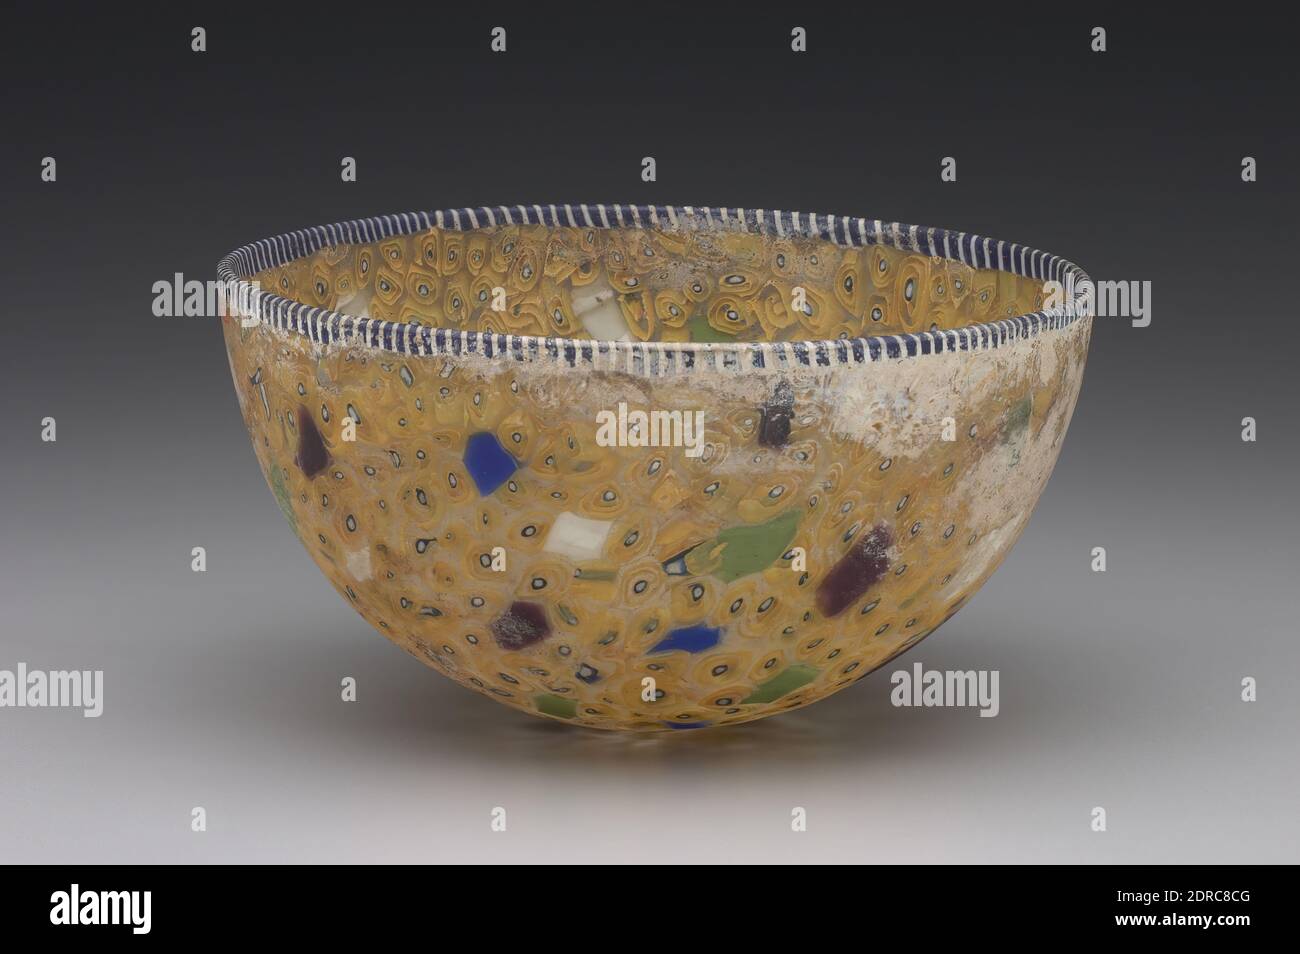 Bowl, Late 2nd century B.C.–early 1st century A.D., Cast mosaic glass, 7.8 × 14.1 cm (3 1/16 × 5 9/16 in.), This hemispherical bowl is an example of ancient mosaic glass, a type of highly colorful glassware that attained its greatest popularity in the second and first centuries B.C. The mosaic decoration (sometimes anachronistically called millefiori after Venetian glass decorated in the same way) was achieved by arranging separate pieces of glass–often with colorful patterns already worked into them–in a mold and fusing them with heat in an oven or kiln. Stock Photo